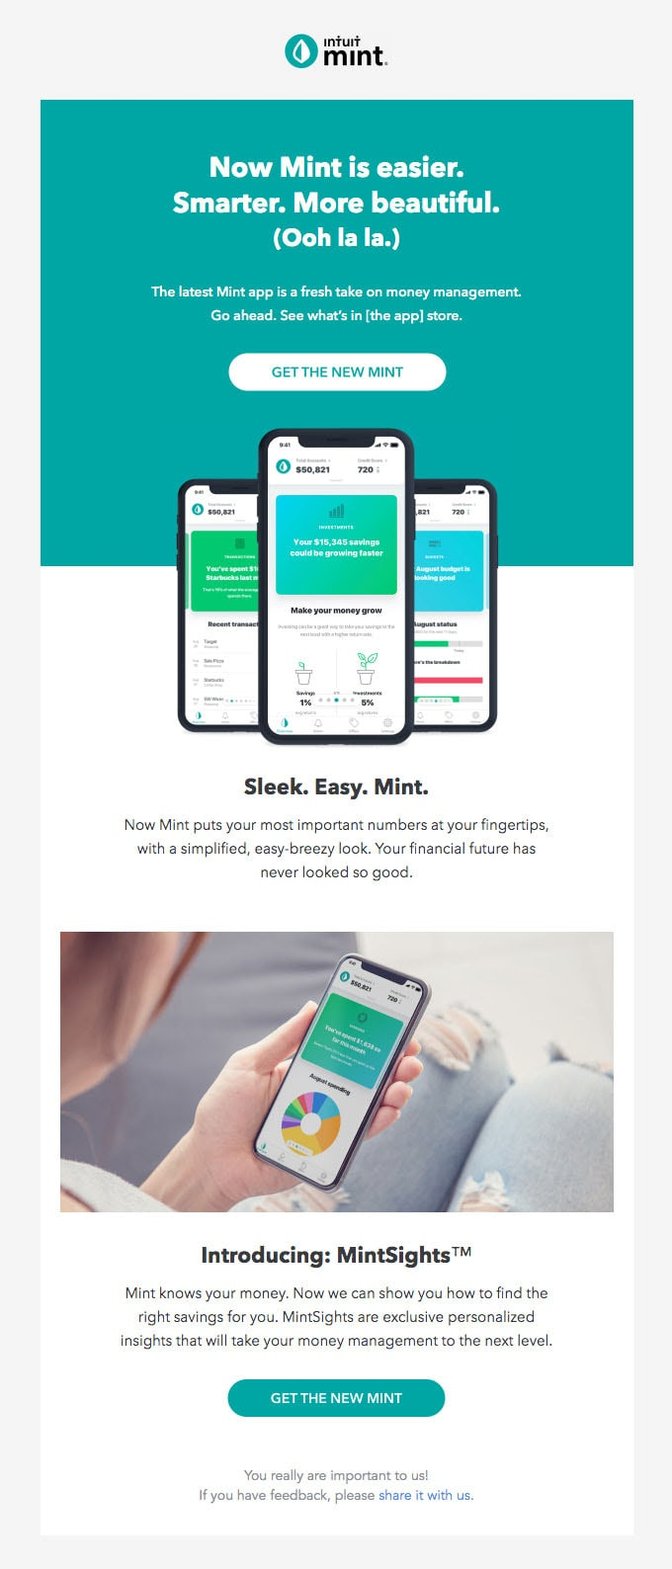 8 Product update email from Mint